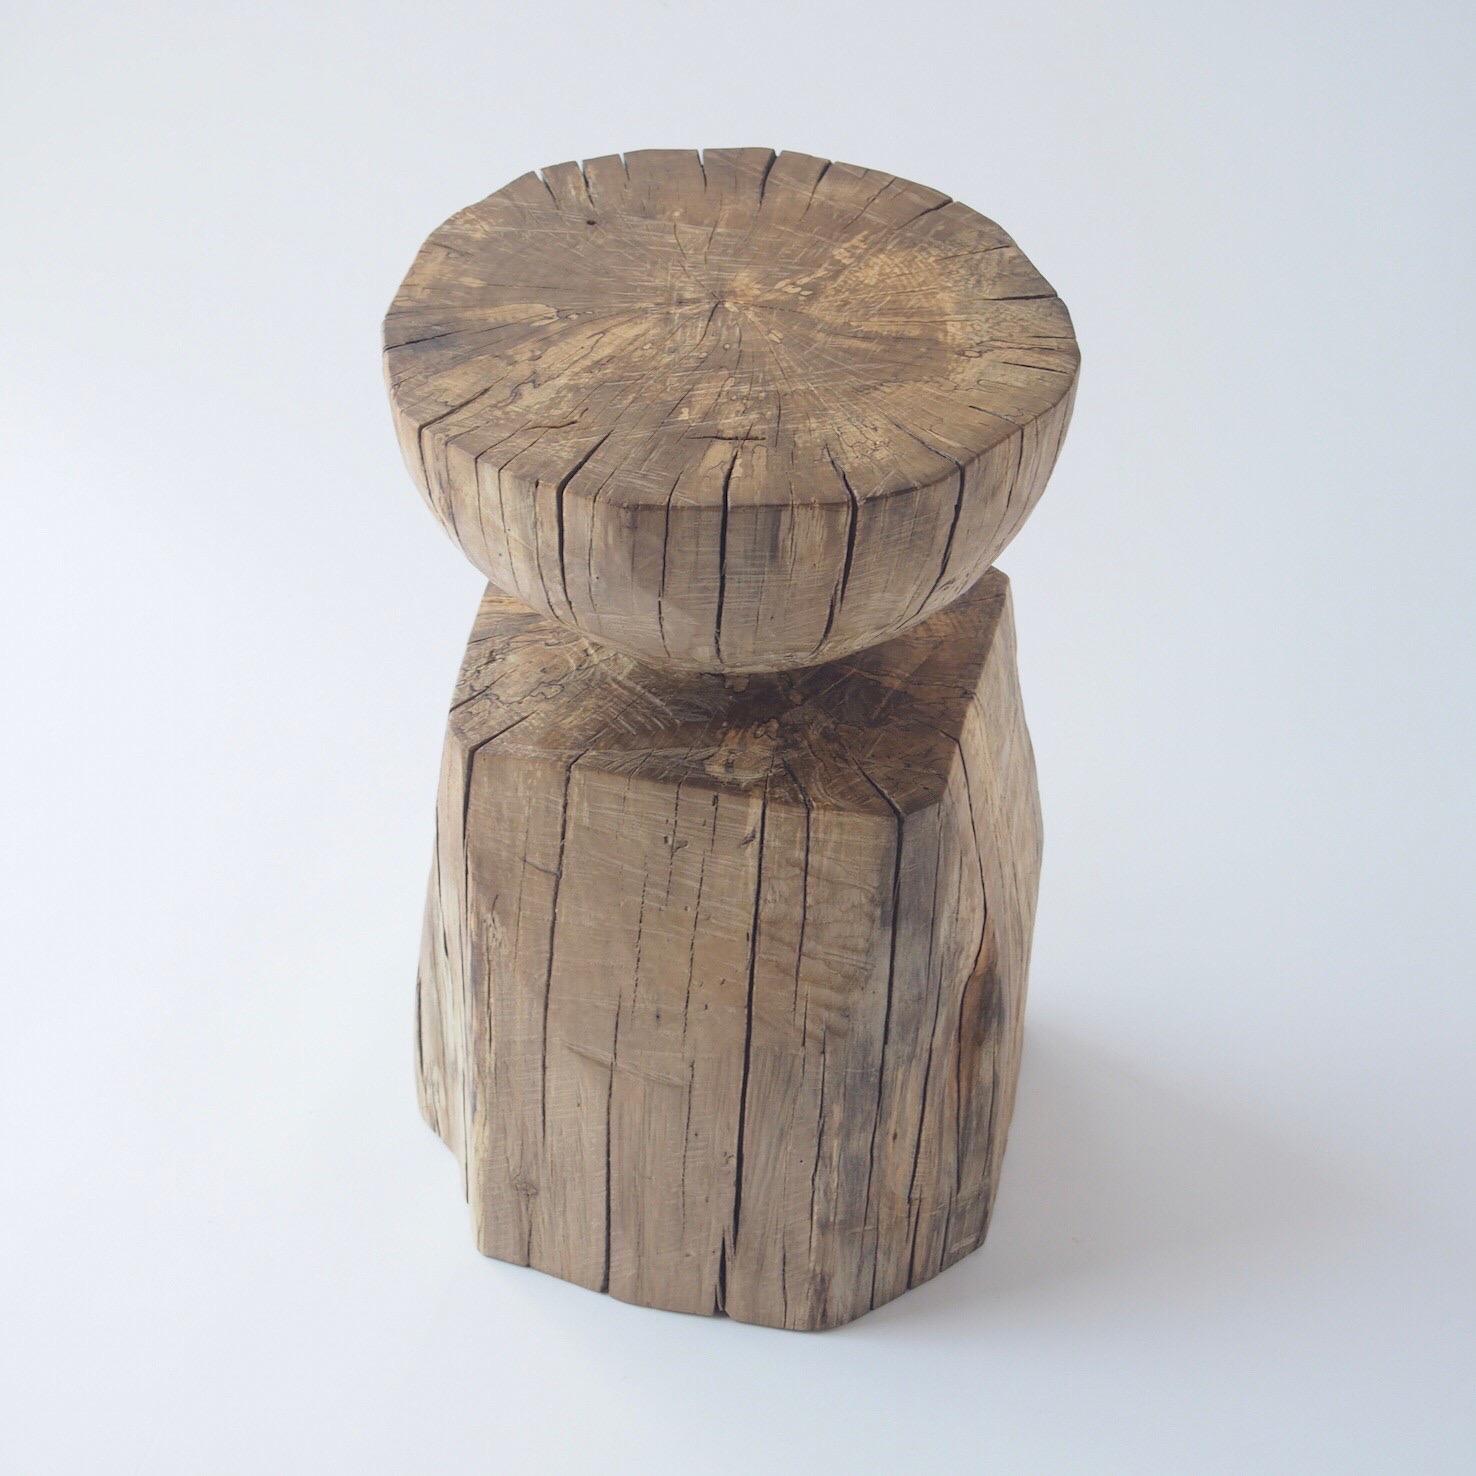 Contemporary Hiroyuki Nishimura and Zogei Furniture Sculptural Wood Stool11 Tribal Glamping For Sale